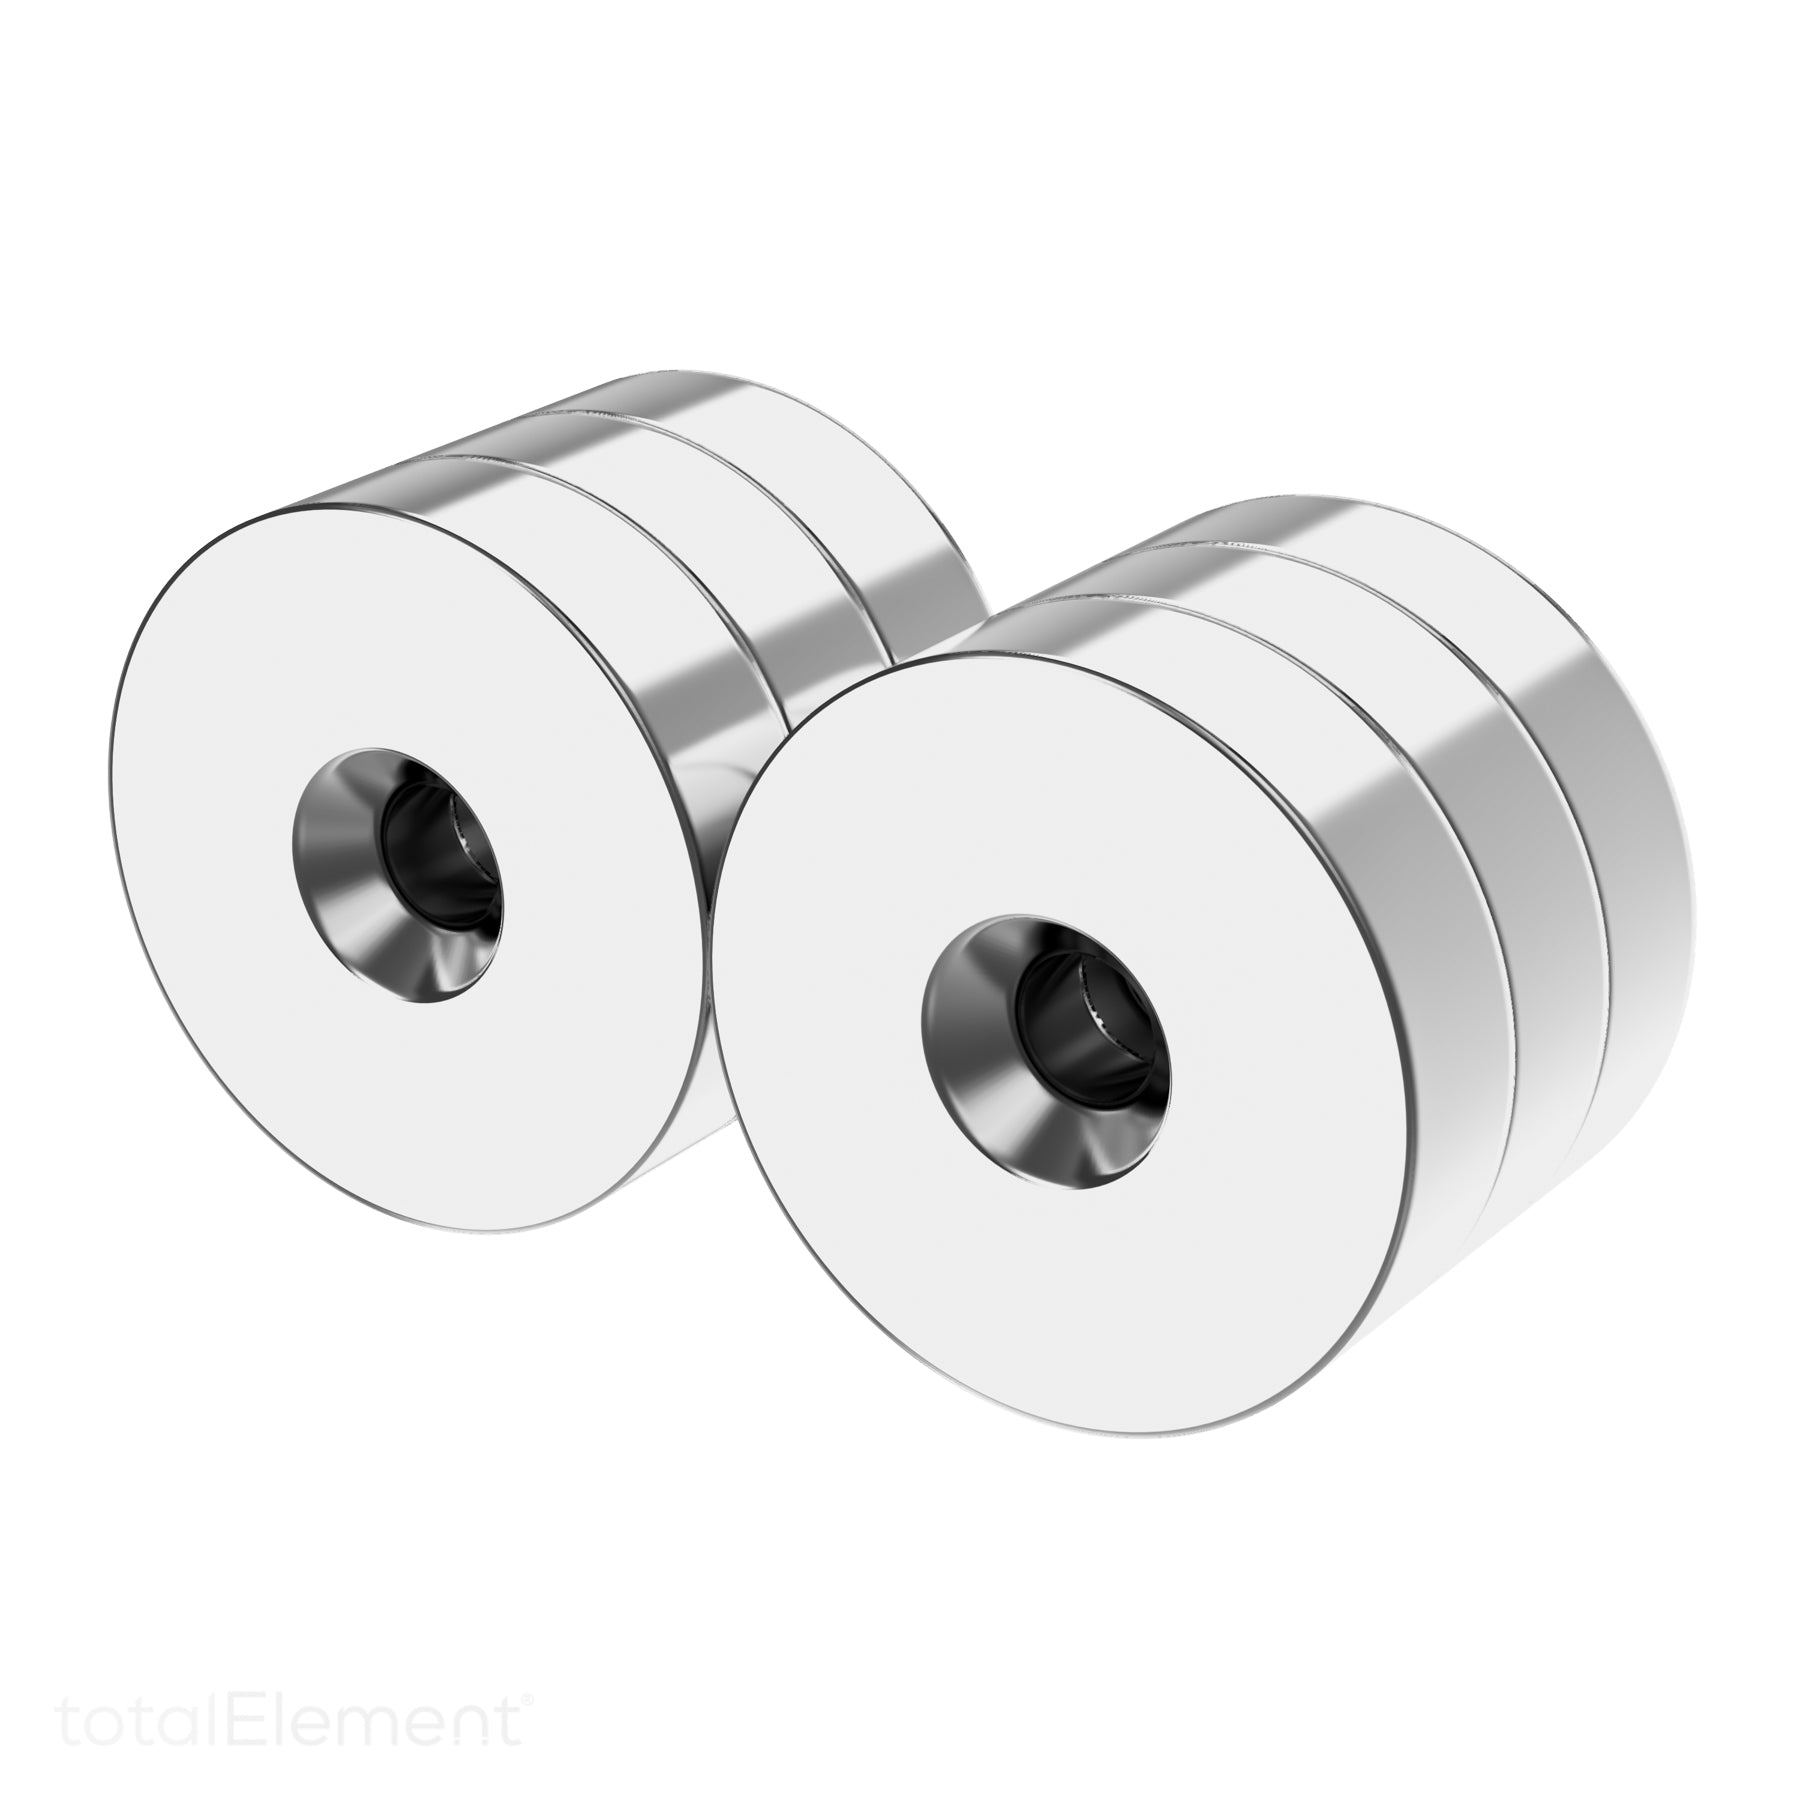 1 x 1/4 Inch Strong Neodymium Rare Earth Countersunk Ring Magnets